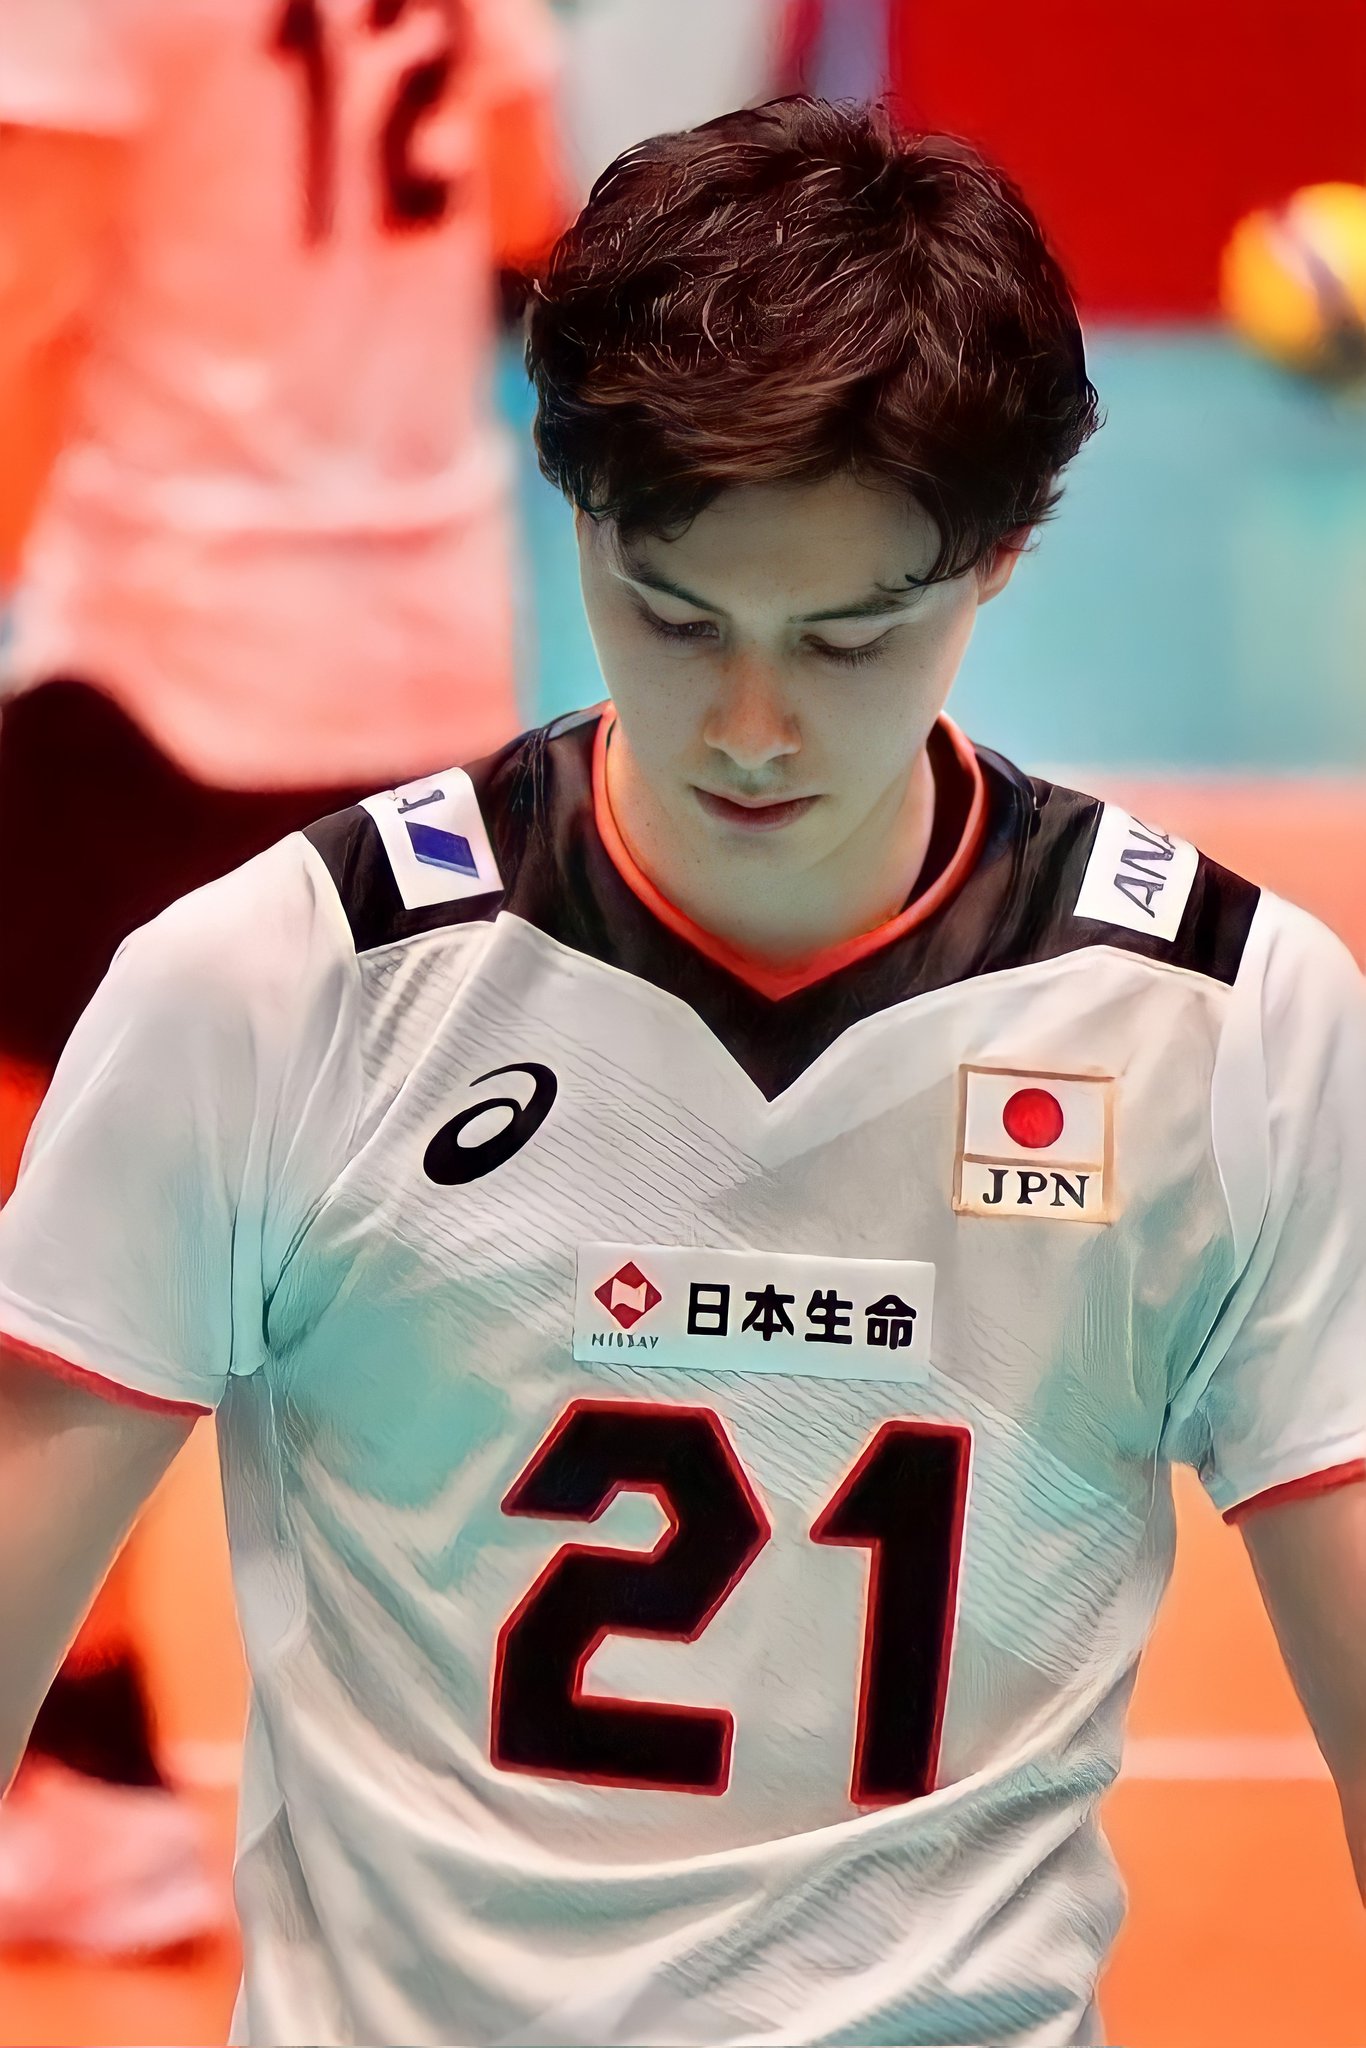 Christine Blue simp to alot of KPOP IDOL But this Handsome Japanese Volleyball Player Hits Different